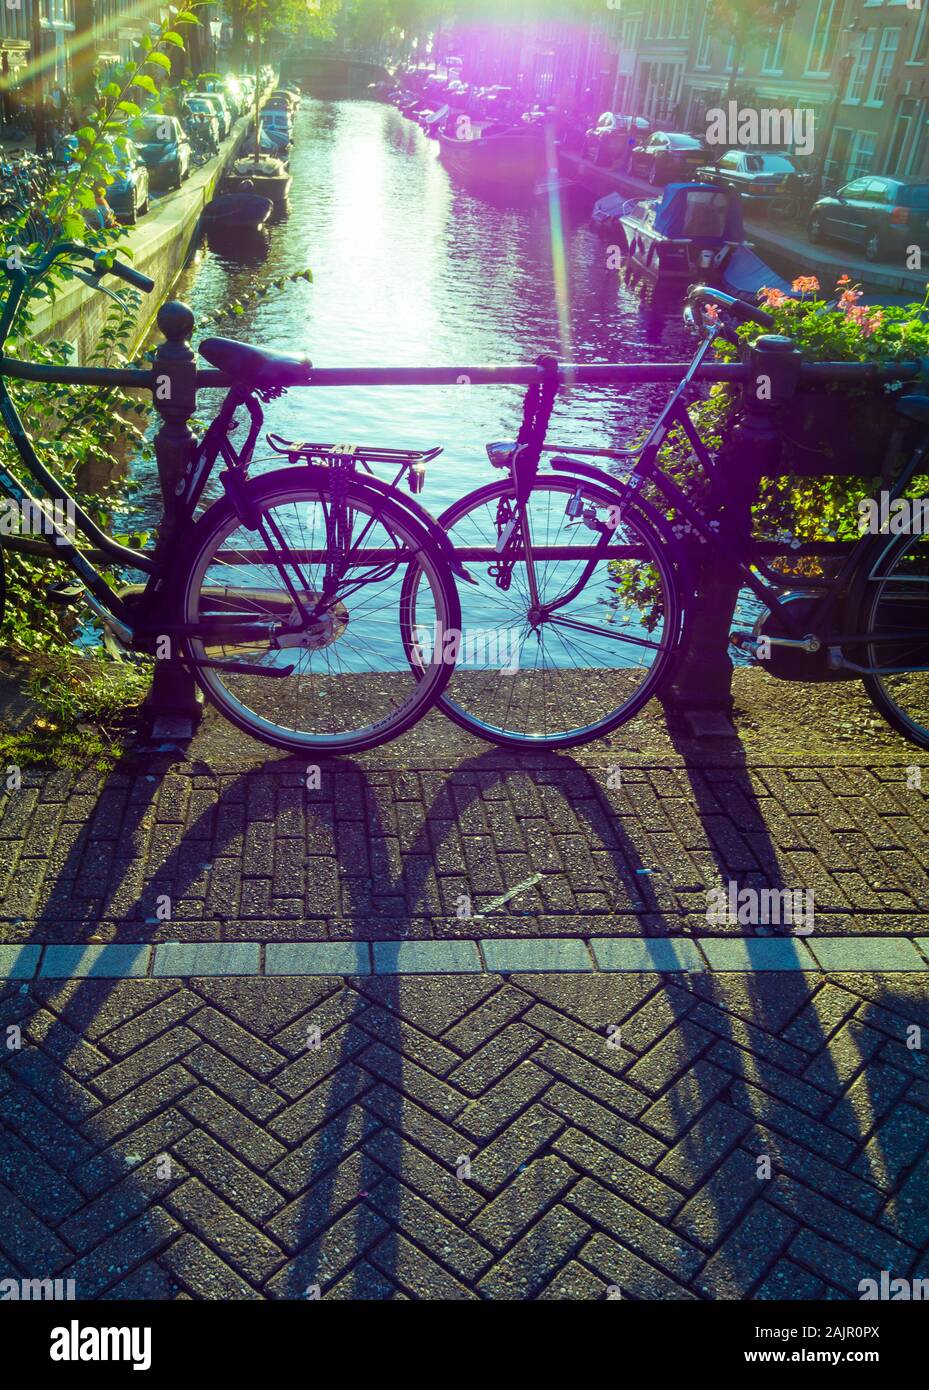 Off-color image of parked bicycles on a canal bridge in Amsterdam's old Jordaan quarter (Egelantiersgracht). Vintage polaroid color style, lens flare. Stock Photo